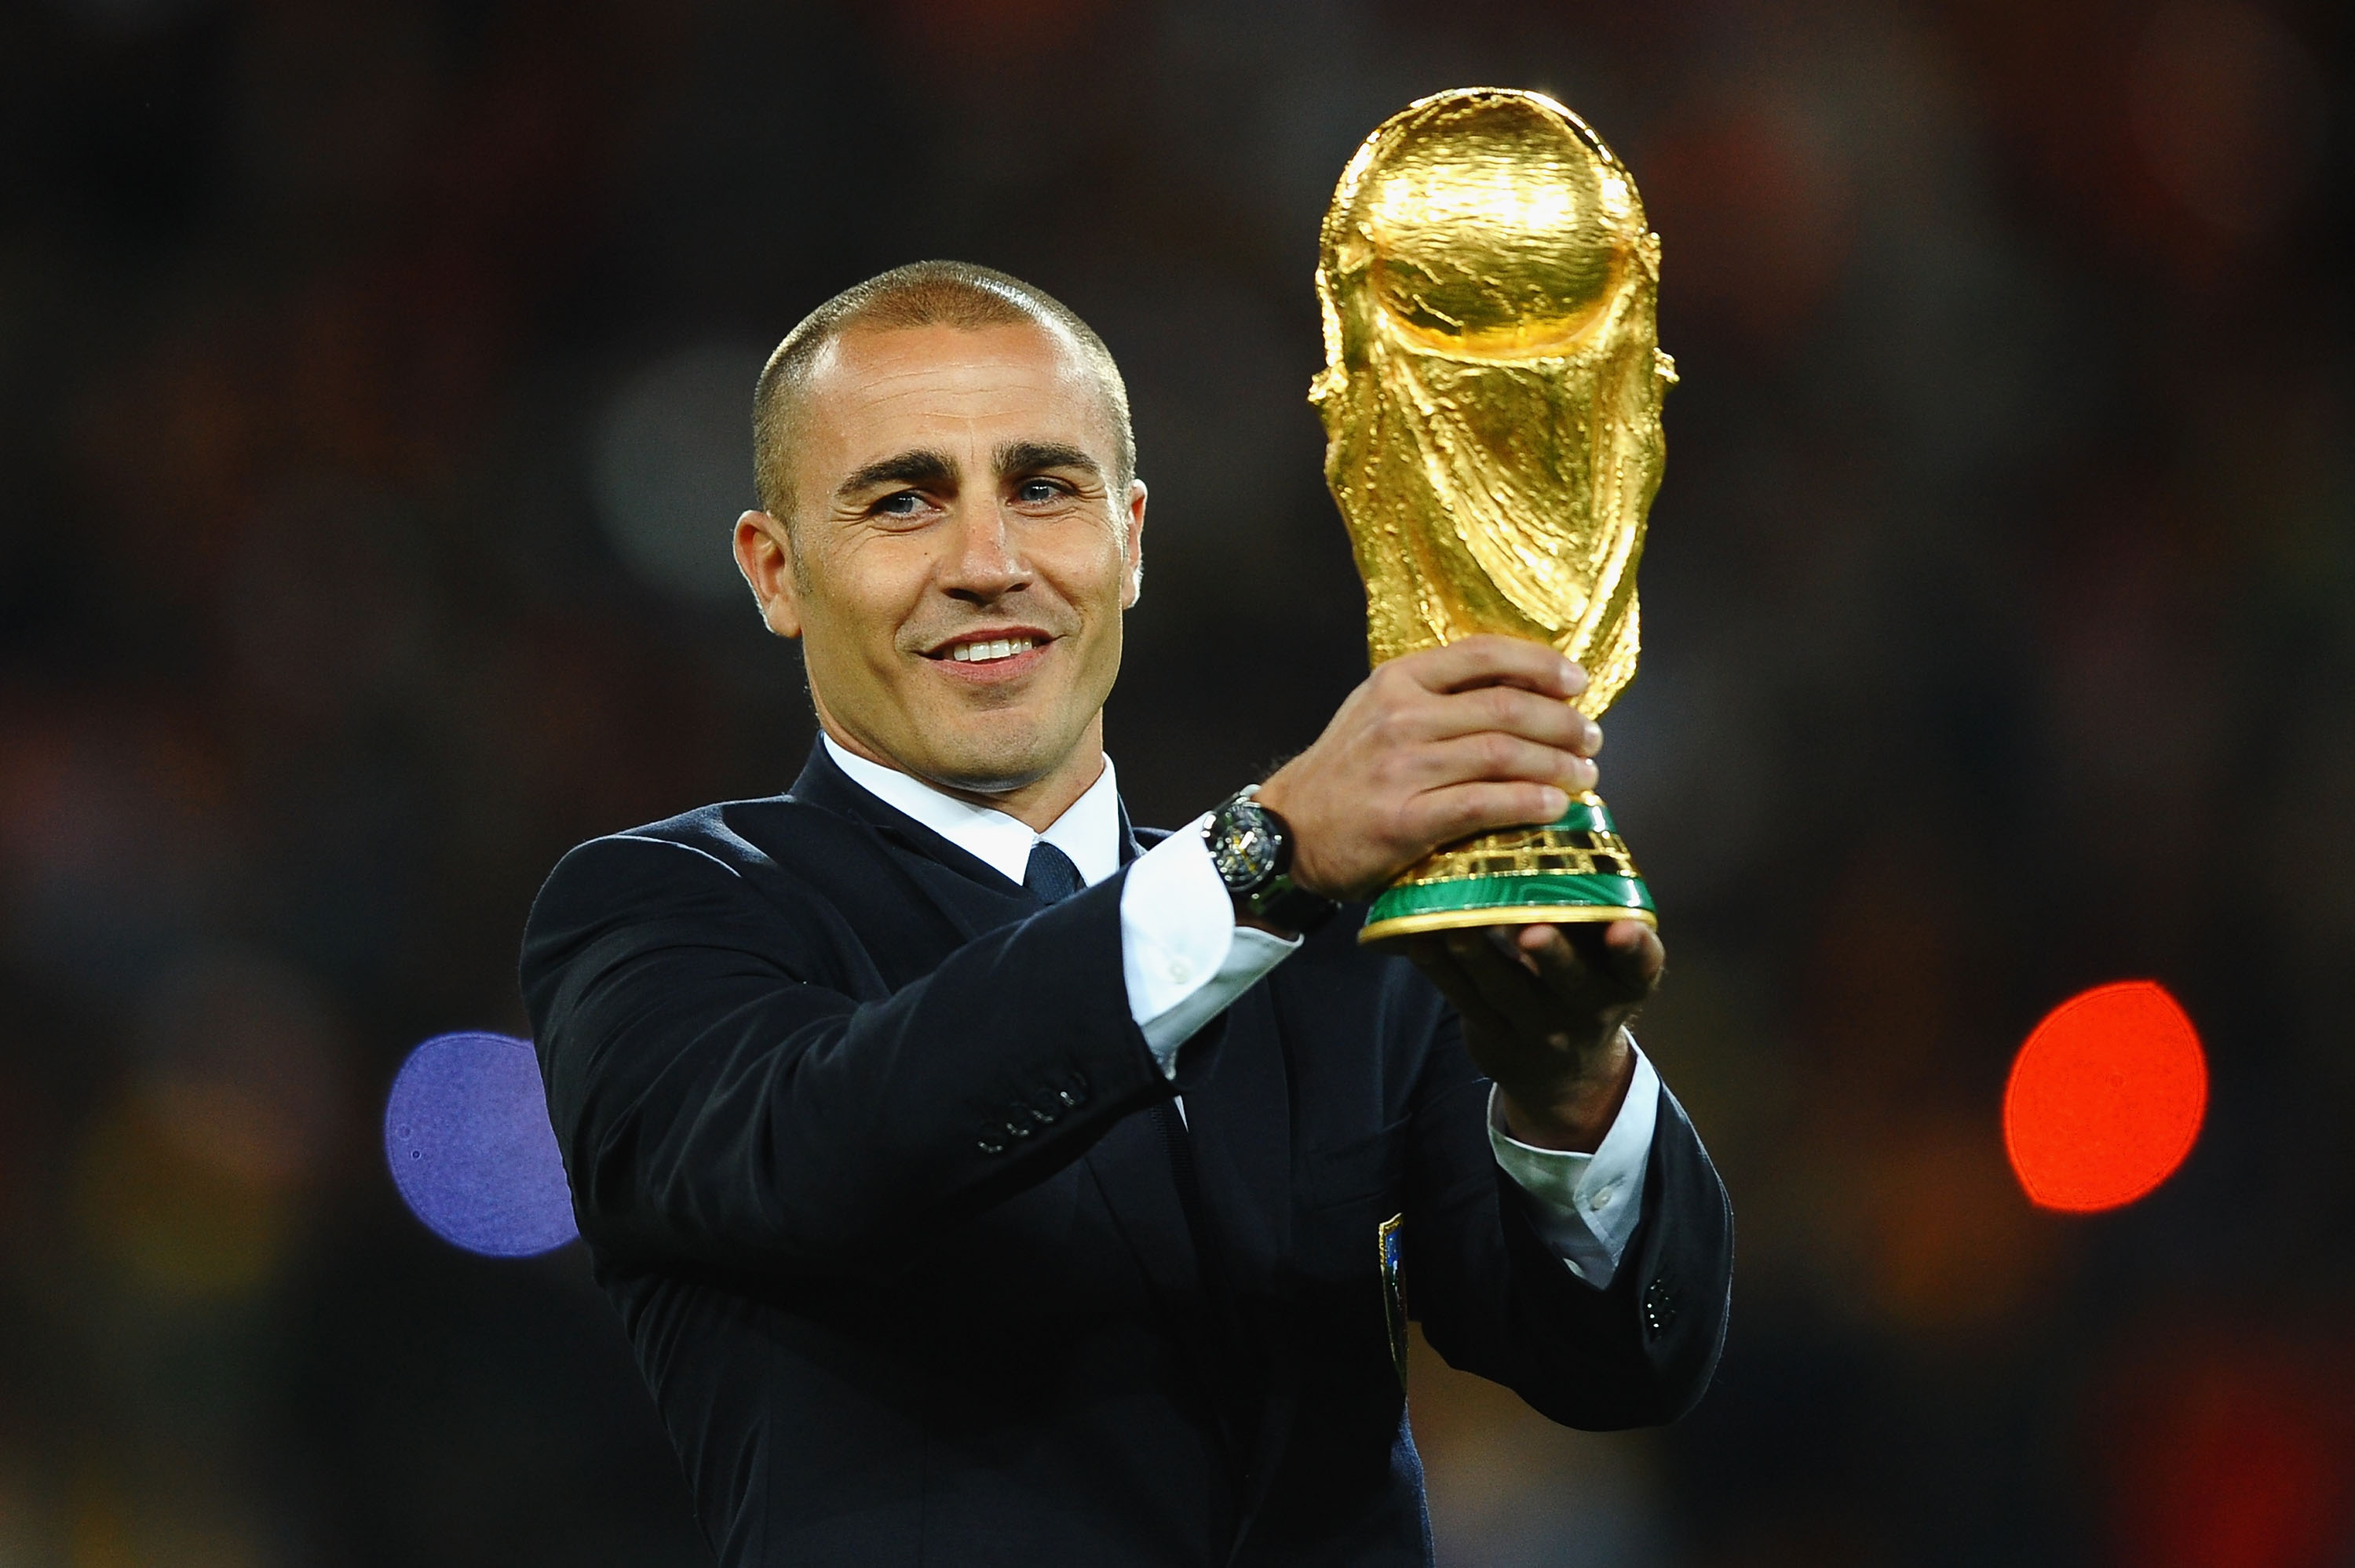 JOHANNESBURG, SOUTH AFRICA - JULY 11:  Fabio Cannavaro of Italy presents the World Cup trophy prior to the 2010 FIFA World Cup South Africa Final match between Netherlands and Spain at Soccer City Stadium on July 11, 2010 in Johannesburg, South Africa.  (